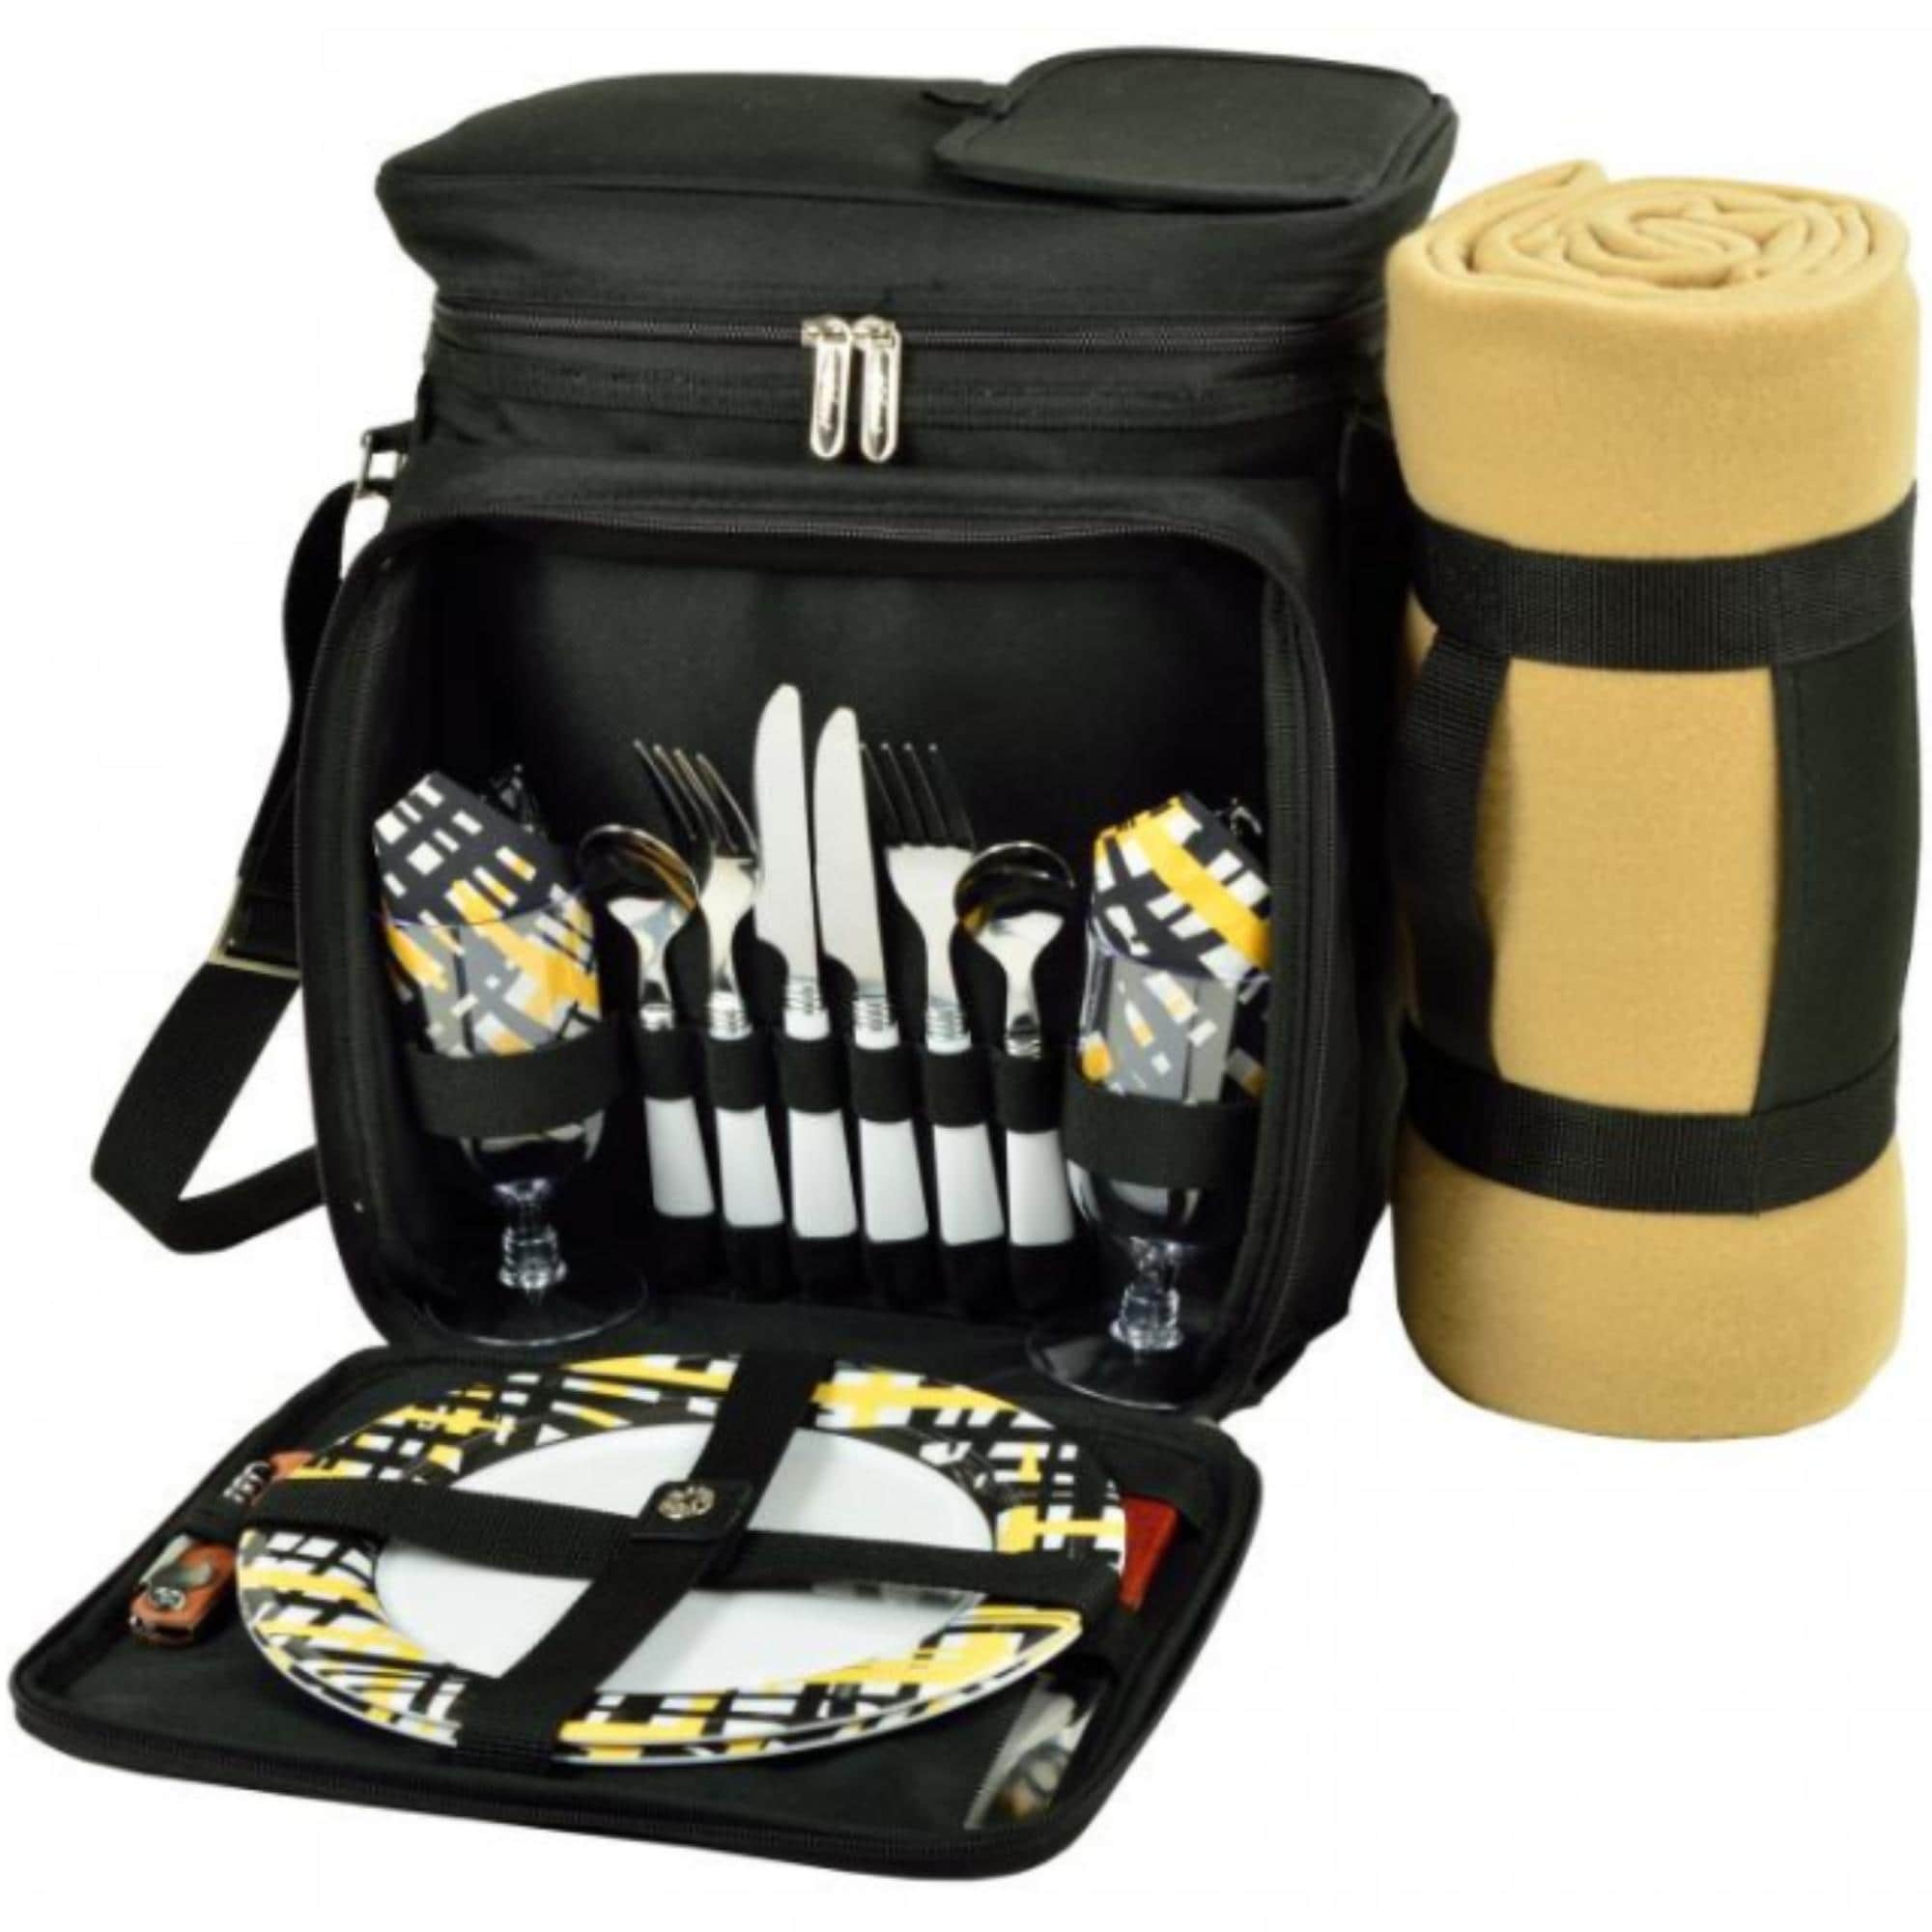 Picnic Time PTX MLB National League Backpack Cooler - Bed Bath & Beyond -  7963362